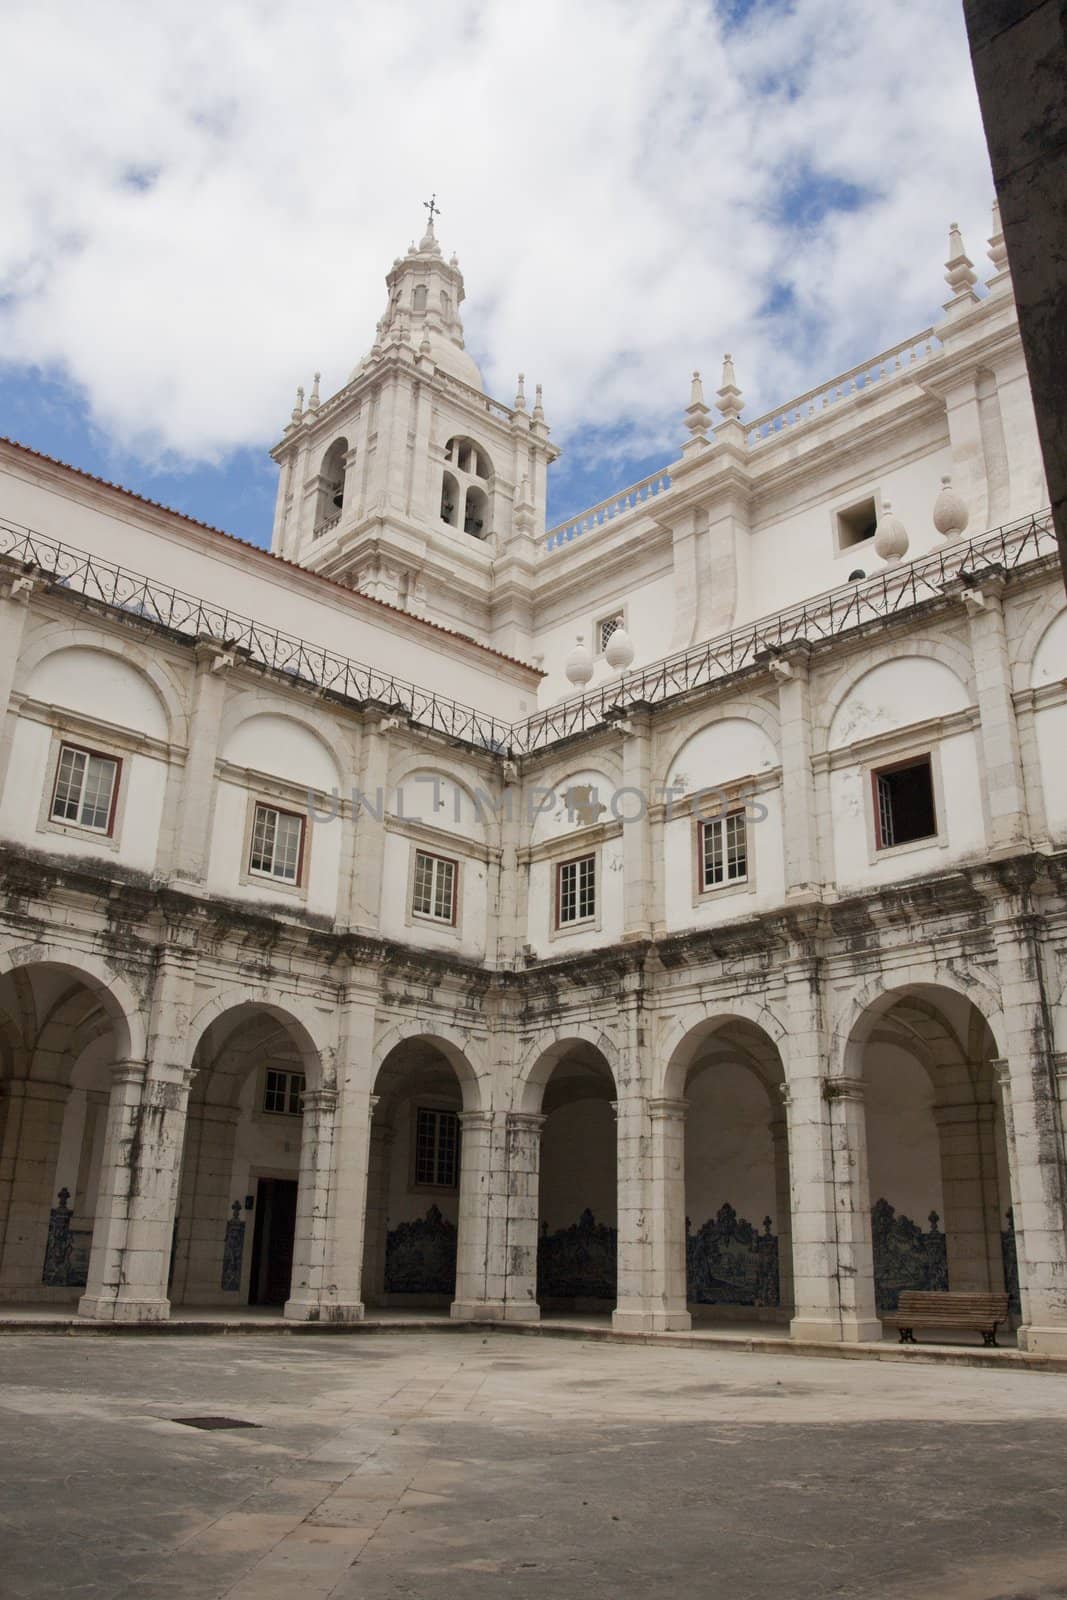 View of the Monastery Sao Vicente de Fora located on Lisbon, Portugal.